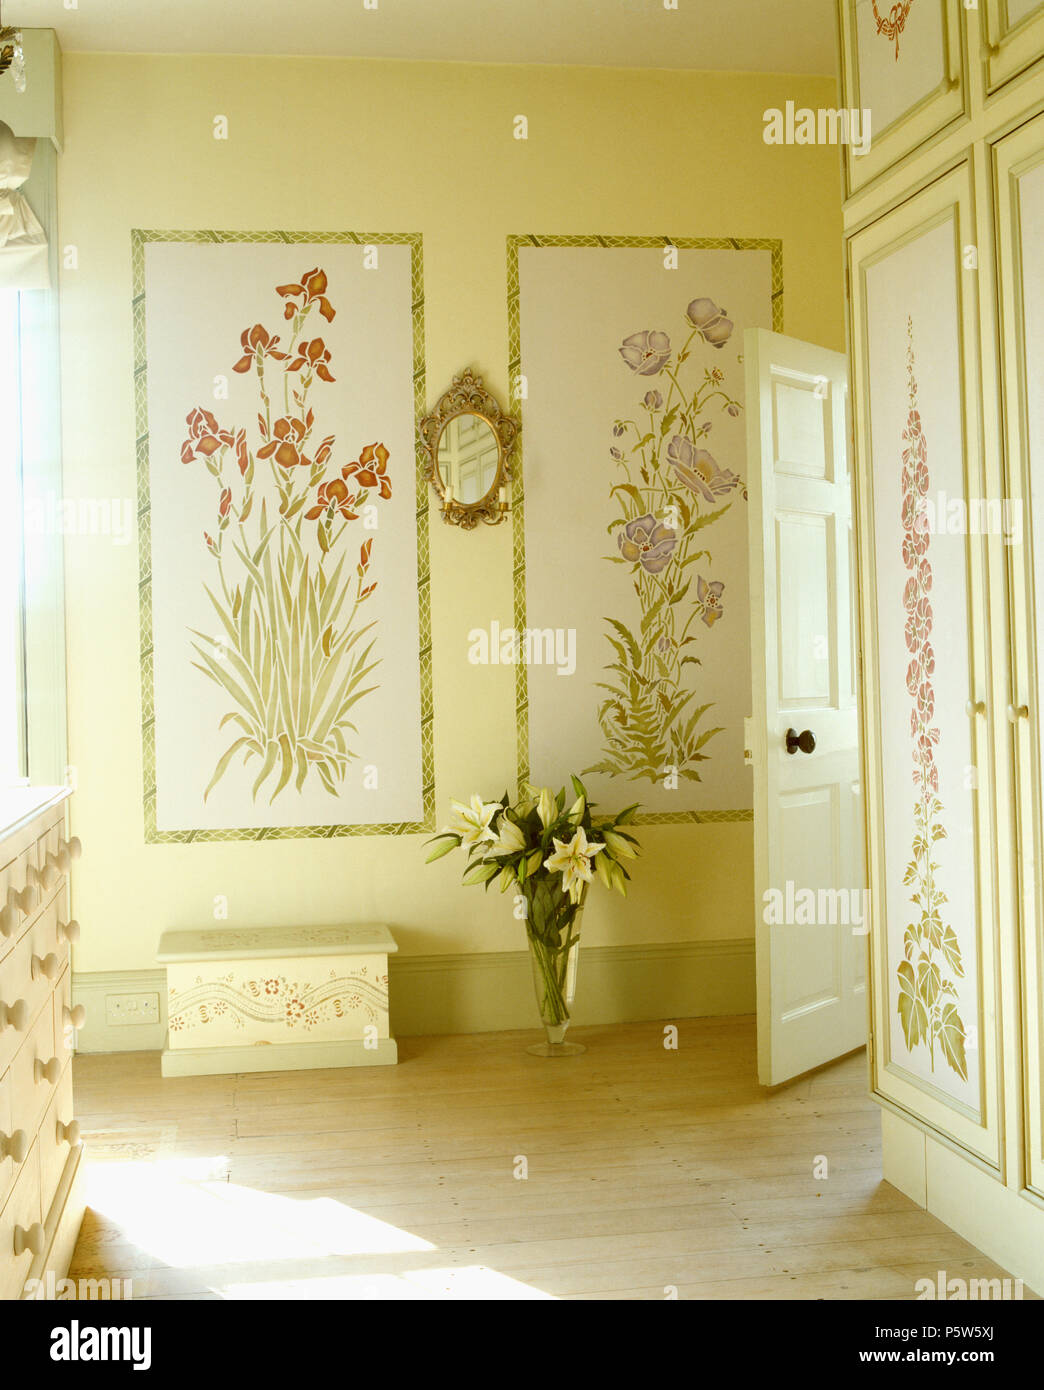 Stencilled flowering plants on walls of country bedroom with wooden flooring Stock Photo